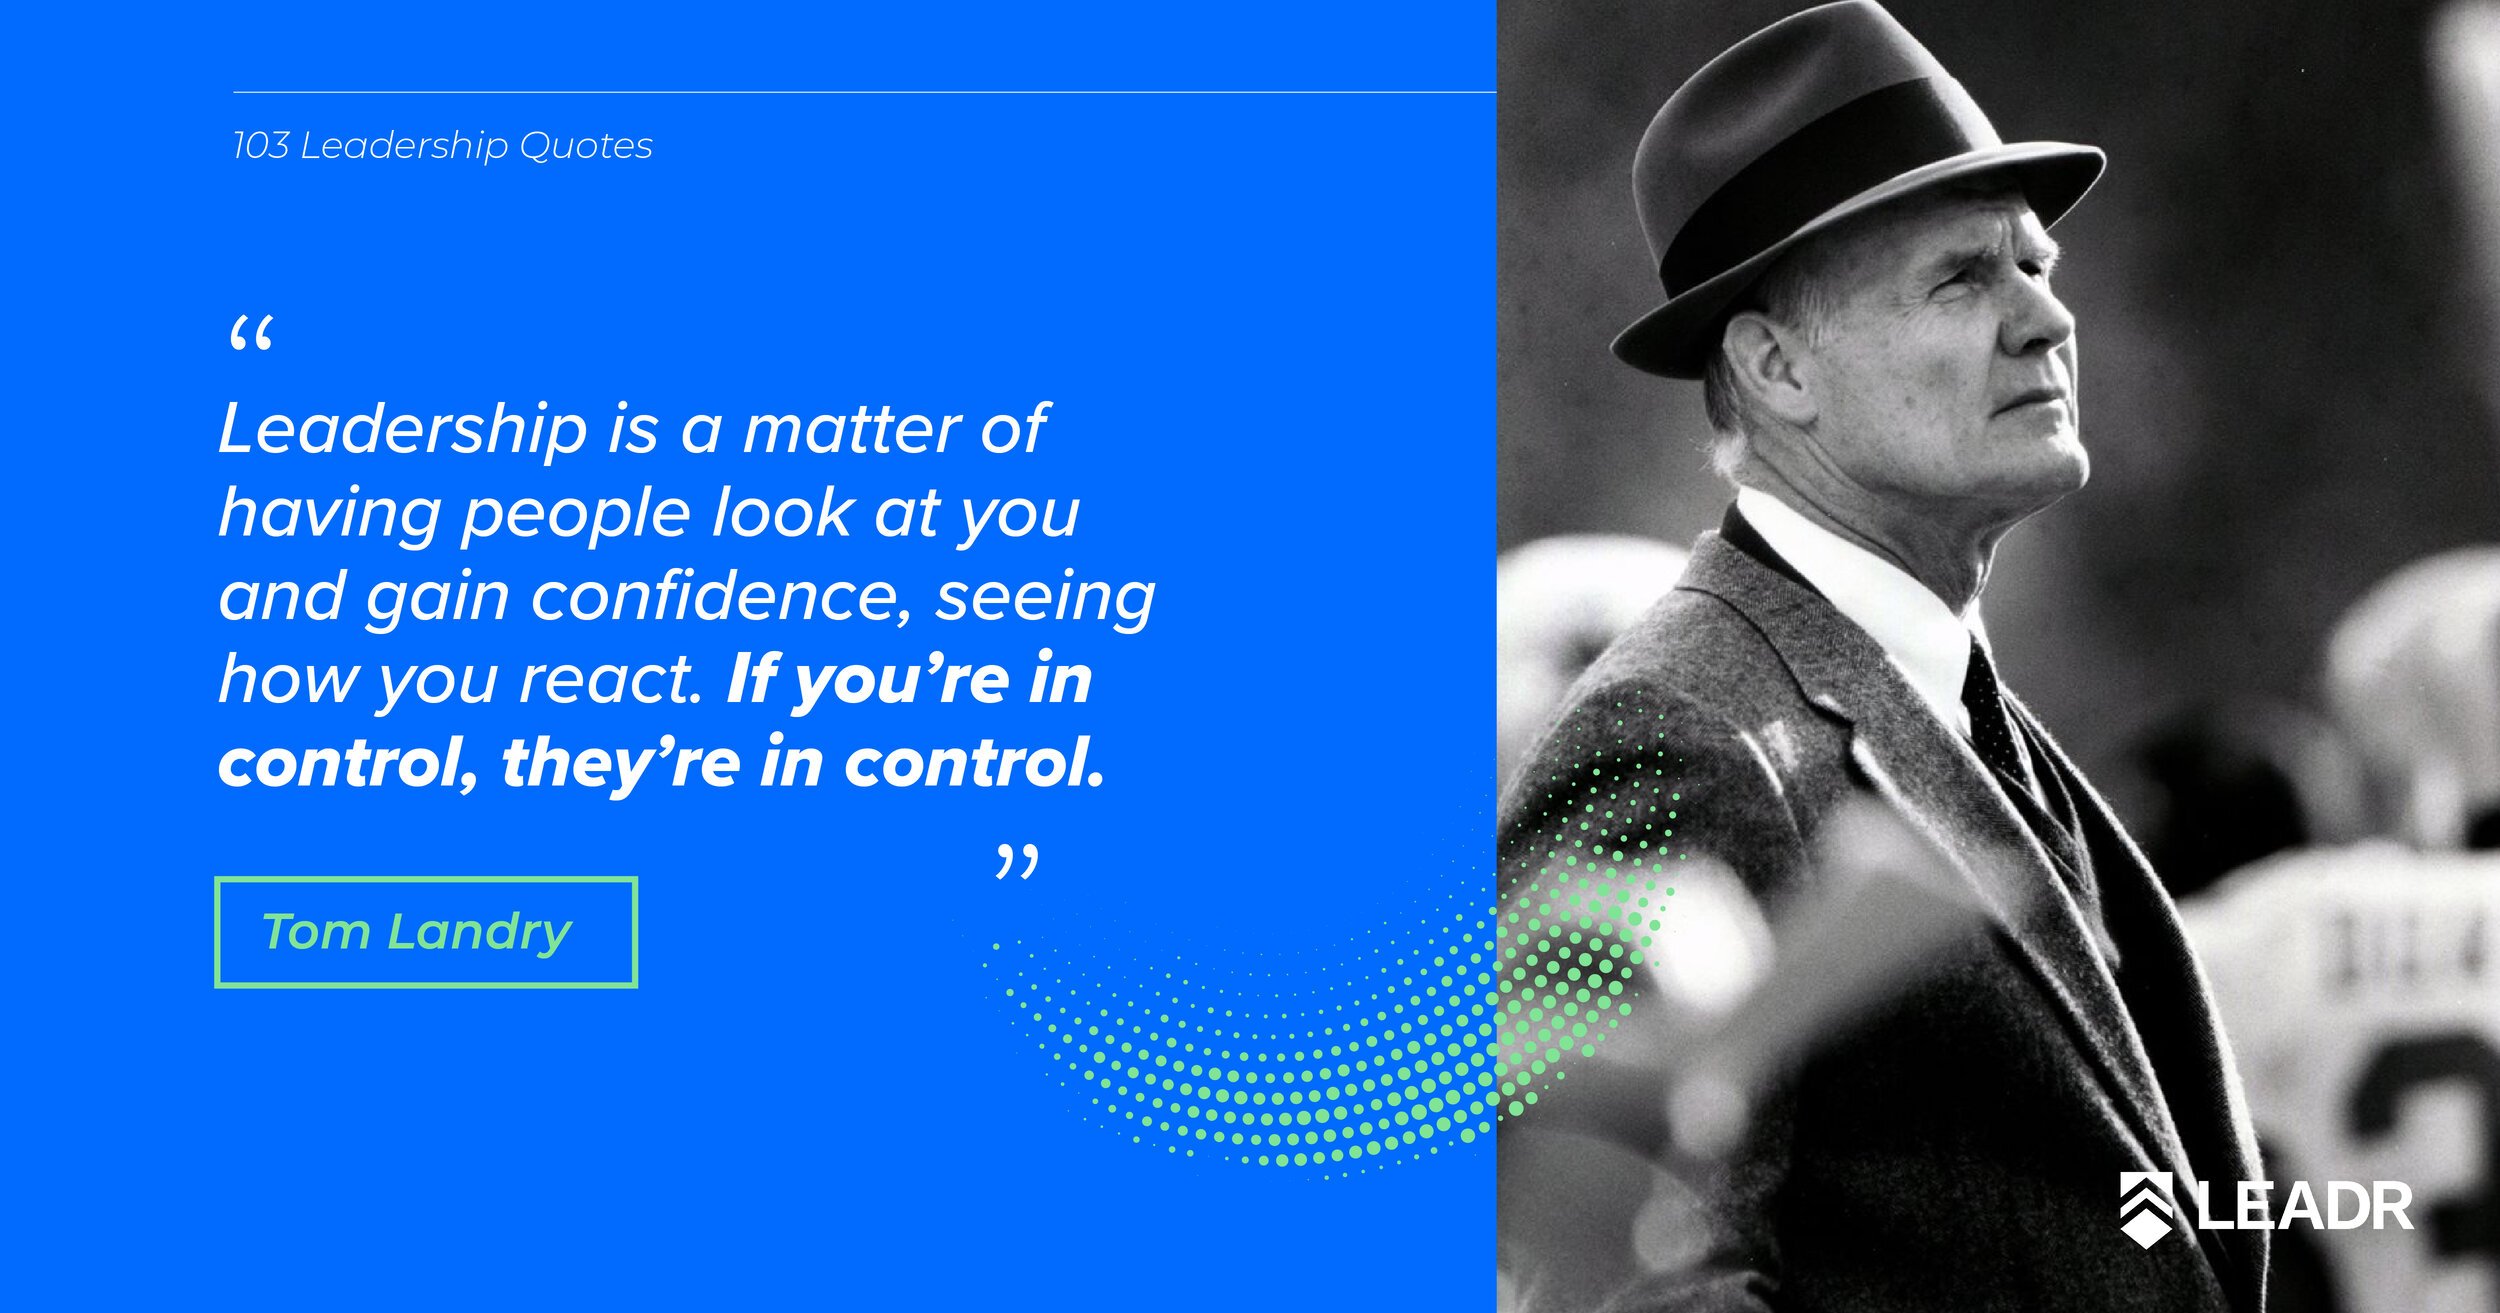 Royalty free downloadable leadership quotes - Tom Landry